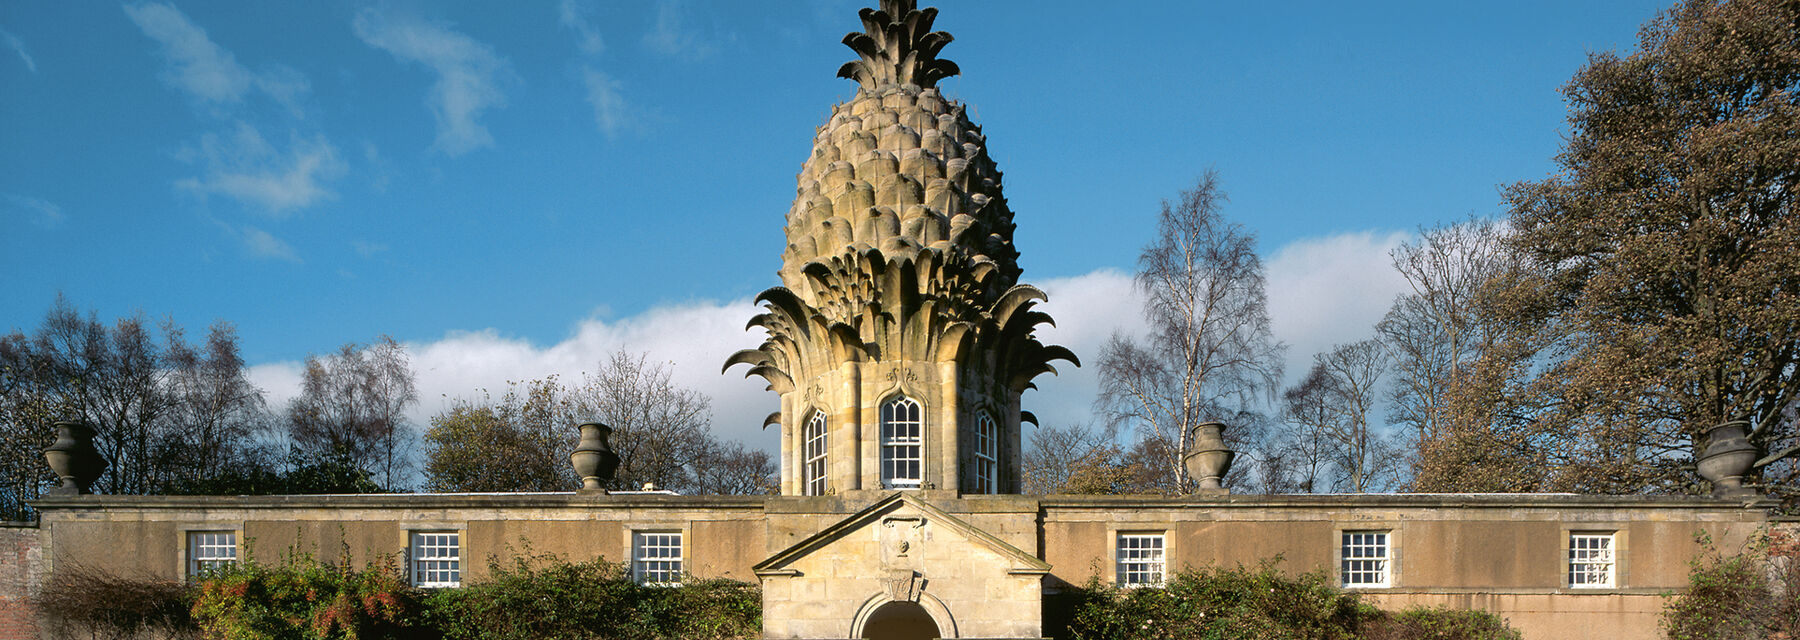 A pineapple-shaped building stands at the centre of a tall, stone garden wall. Shrubs are trained against the garden wall. Tall trees stand at either edge.